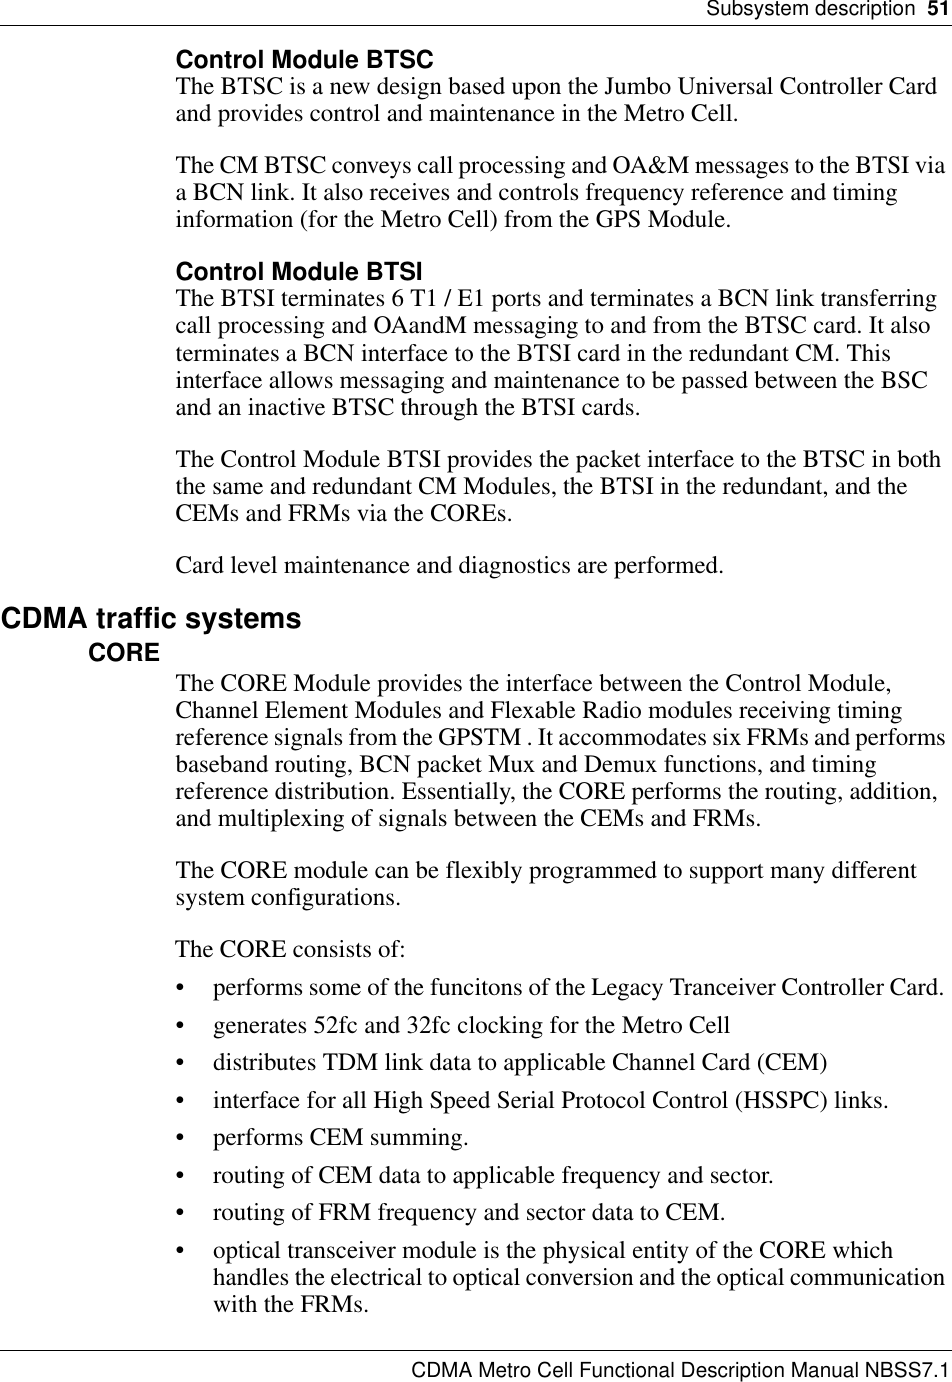 Subsystem description  51CDMA Metro Cell Functional Description Manual NBSS7.1Control Module BTSCThe BTSC is a new design based upon the Jumbo Universal Controller Card and provides control and maintenance in the Metro Cell.The CM BTSC conveys call processing and OA&amp;M messages to the BTSI via a BCN link. It also receives and controls frequency reference and timing information (for the Metro Cell) from the GPS Module.Control Module BTSIThe BTSI terminates 6 T1 / E1 ports and terminates a BCN link transferring call processing and OAandM messaging to and from the BTSC card. It also terminates a BCN interface to the BTSI card in the redundant CM. This interface allows messaging and maintenance to be passed between the BSC and an inactive BTSC through the BTSI cards.The Control Module BTSI provides the packet interface to the BTSC in both the same and redundant CM Modules, the BTSI in the redundant, and the CEMs and FRMs via the COREs.Card level maintenance and diagnostics are performed.CDMA traffic systemsCORE The CORE Module provides the interface between the Control Module, Channel Element Modules and Flexable Radio modules receiving timing reference signals from the GPSTM . It accommodates six FRMs and performs baseband routing, BCN packet Mux and Demux functions, and timing reference distribution. Essentially, the CORE performs the routing, addition, and multiplexing of signals between the CEMs and FRMs.The CORE module can be flexibly programmed to support many different system configurations.The CORE consists of:• performs some of the funcitons of the Legacy Tranceiver Controller Card. • generates 52fc and 32fc clocking for the Metro Cell• distributes TDM link data to applicable Channel Card (CEM)• interface for all High Speed Serial Protocol Control (HSSPC) links.• performs CEM summing.• routing of CEM data to applicable frequency and sector.• routing of FRM frequency and sector data to CEM.• optical transceiver module is the physical entity of the CORE which handles the electrical to optical conversion and the optical communication with the FRMs.